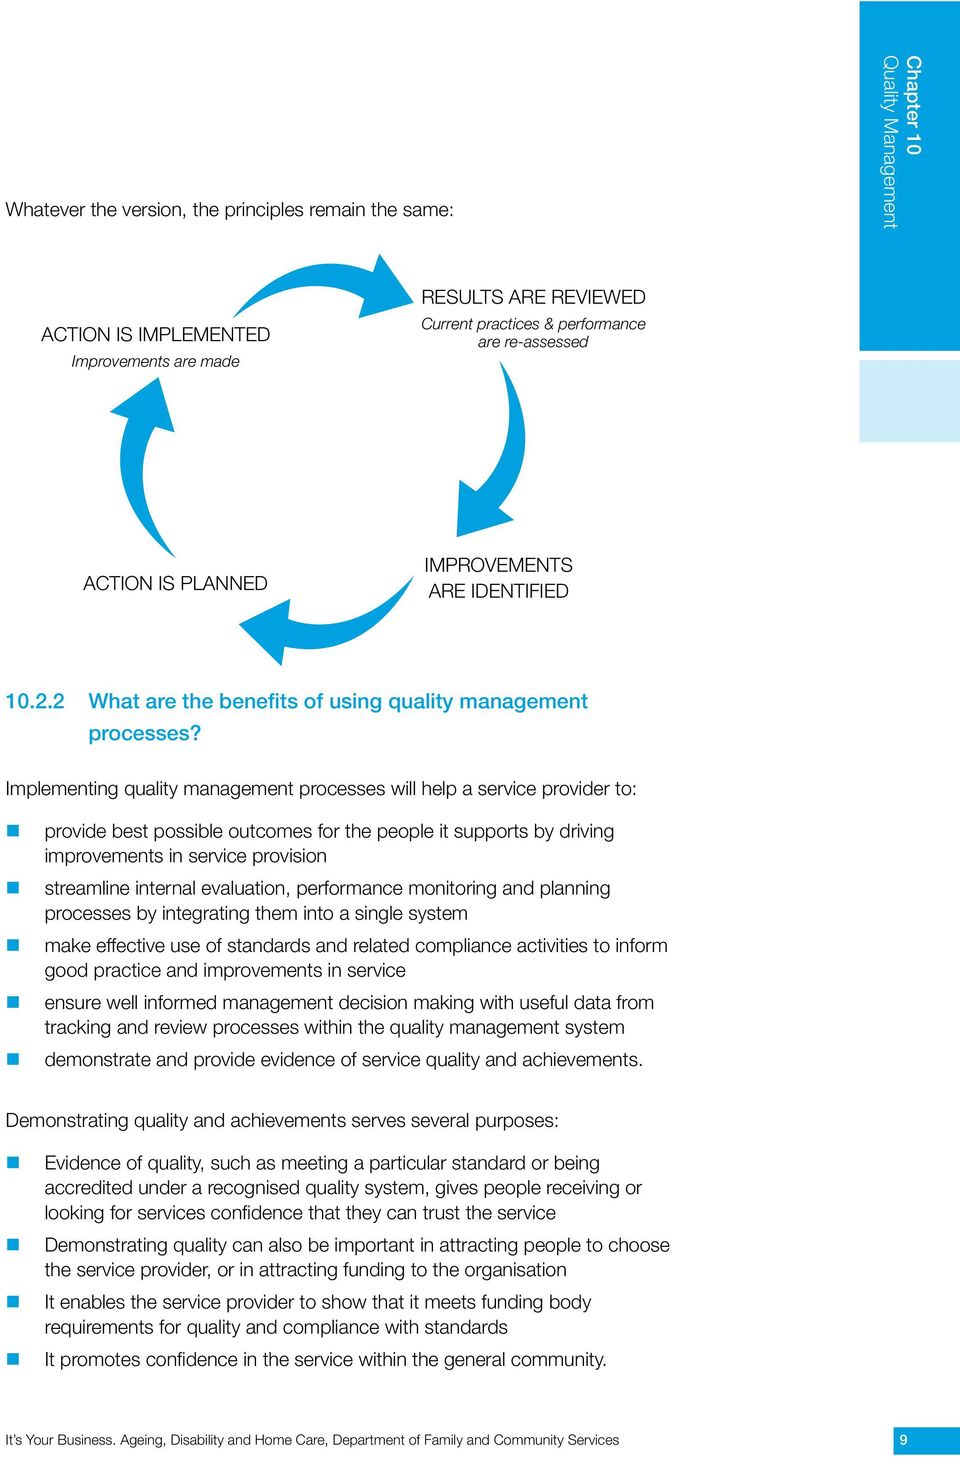 Implementing quality management processes will help a service provider to: provide best possible outcomes for the people it supports by driving improvements in service provision streamline internal